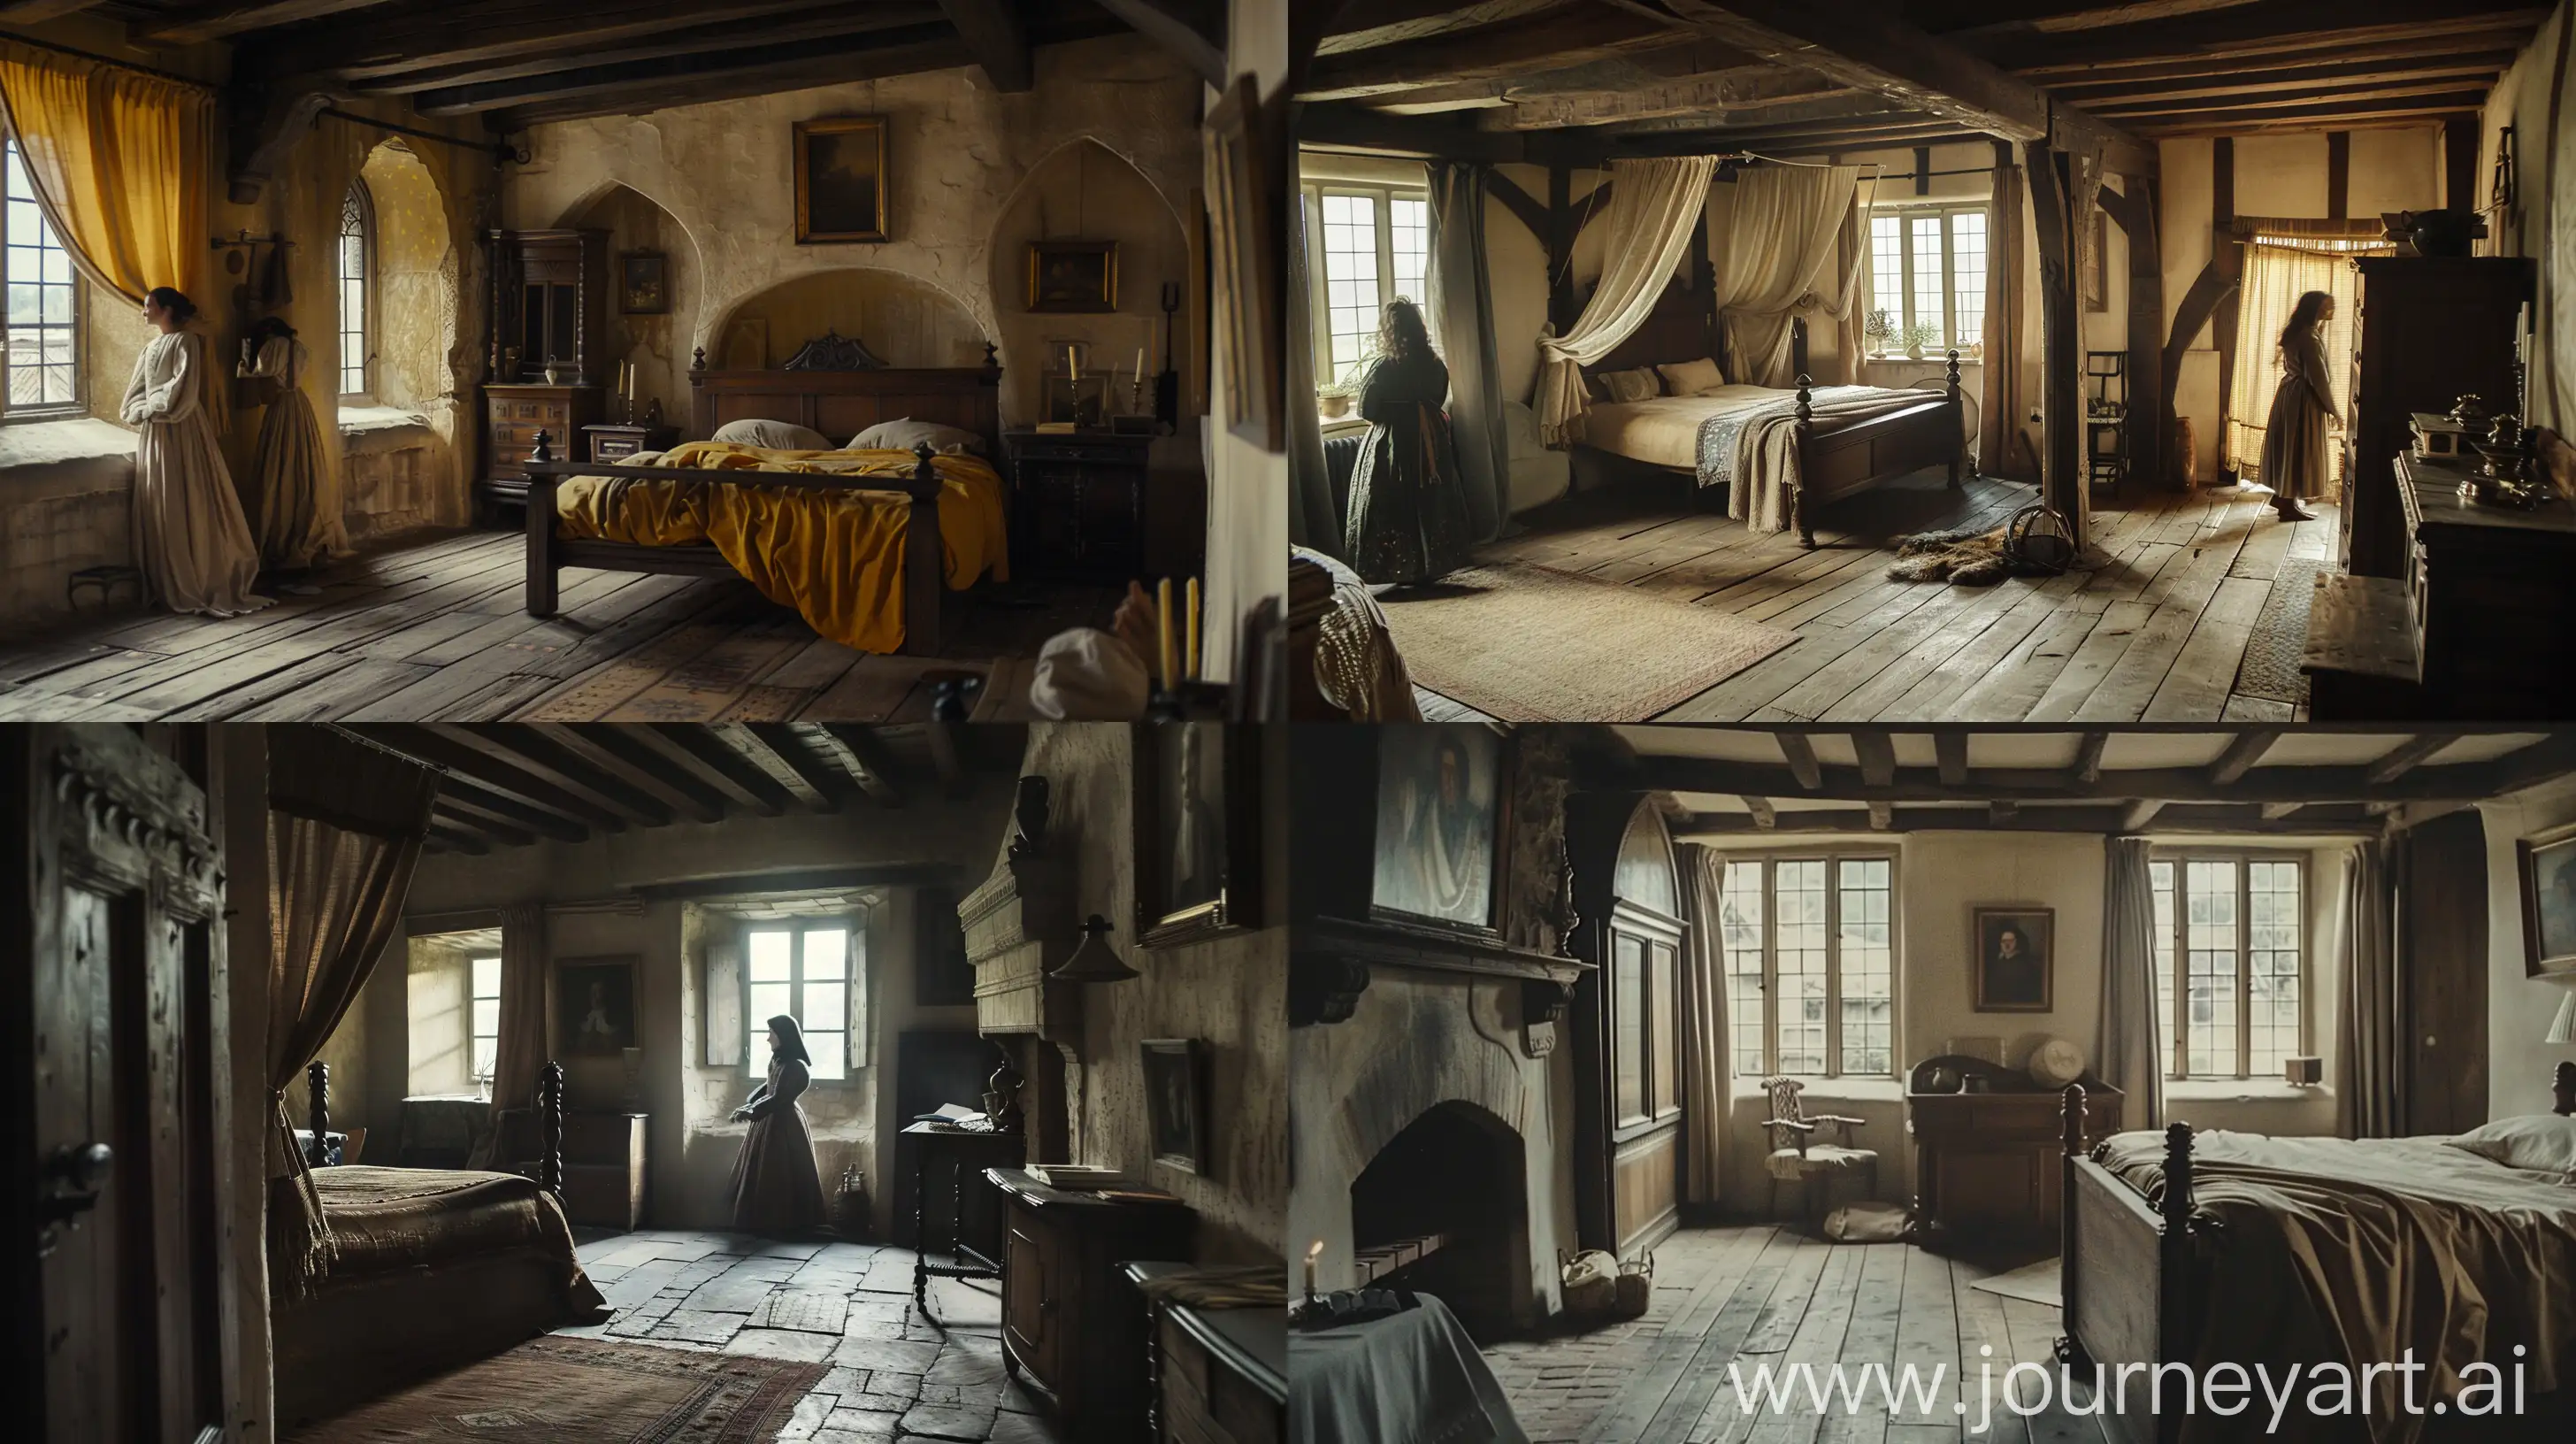 Everyday-Life-in-a-16th-Century-Tudor-Style-Bedroom